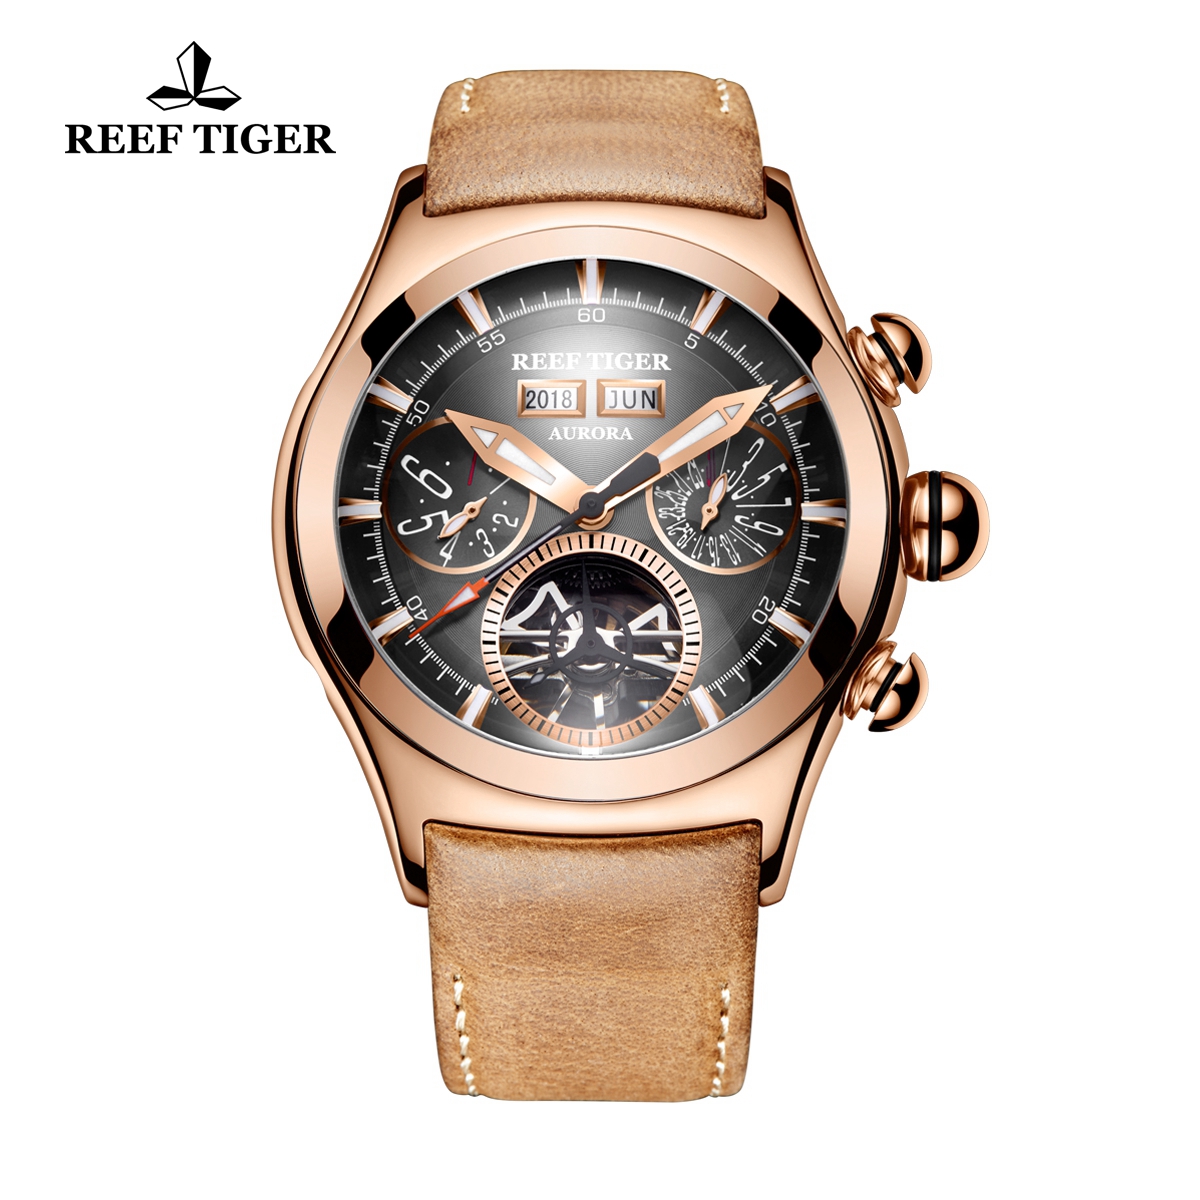 Reef Tiger Air Bubble II Sport Casual Watches Automatic Watch Rose Gold Case Leather Strap RGA7503-PBS